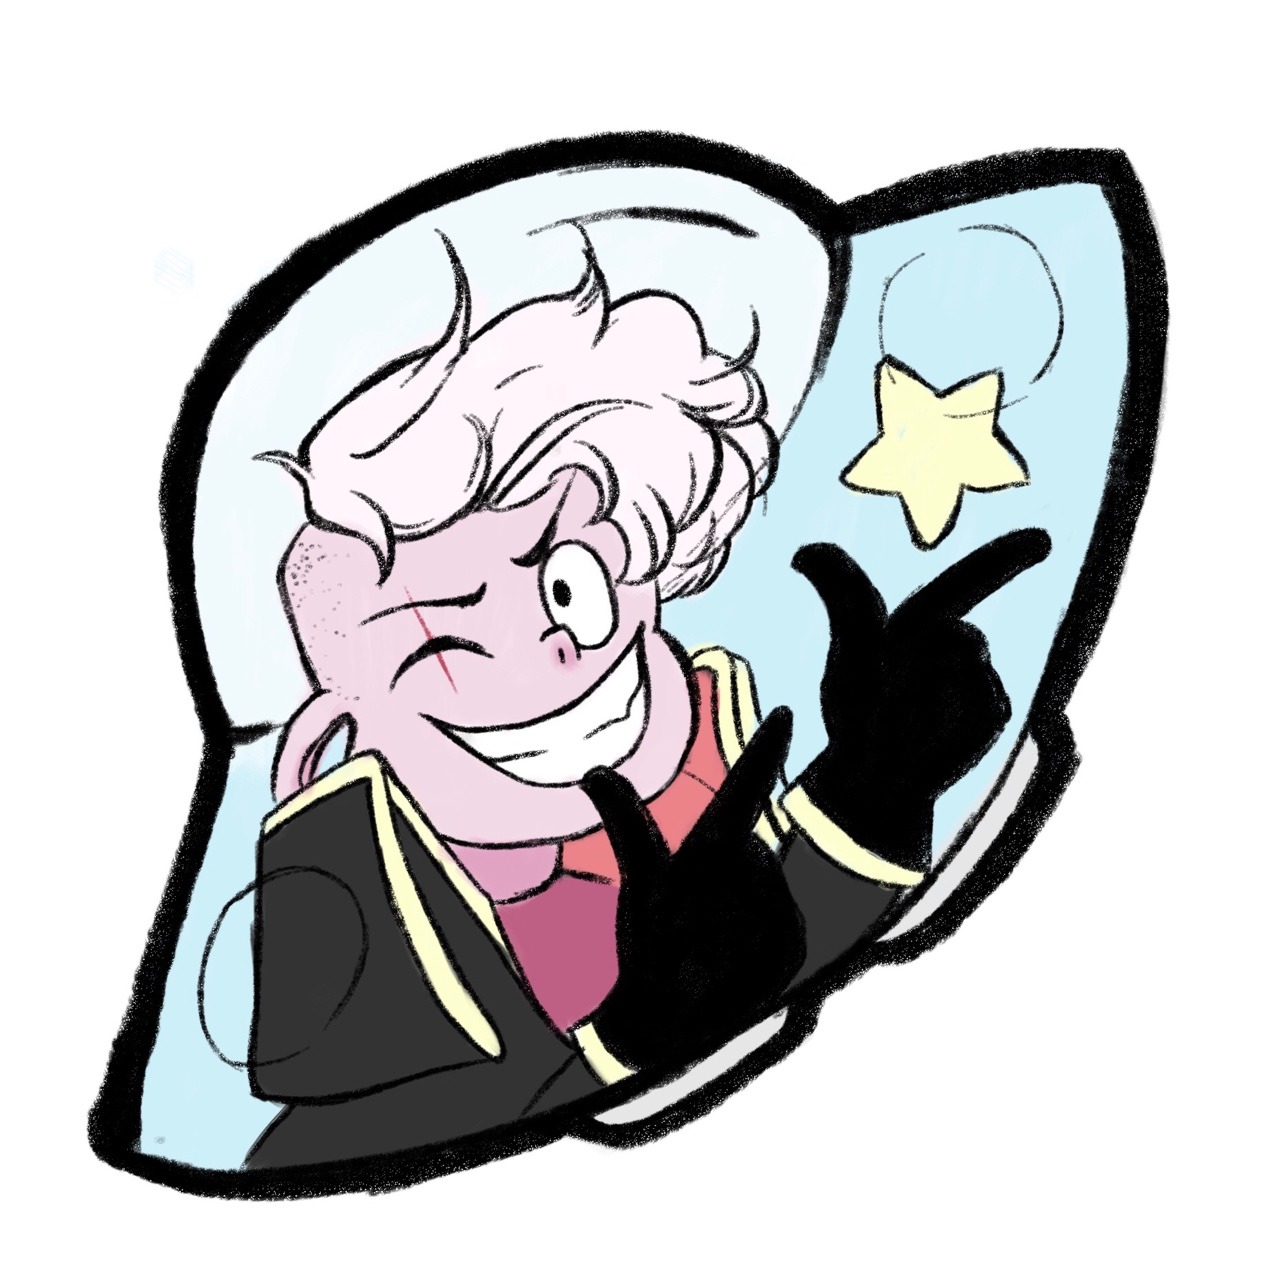 💫Lars of the stars💫 (sticker I created because who doesn’t love Lars)